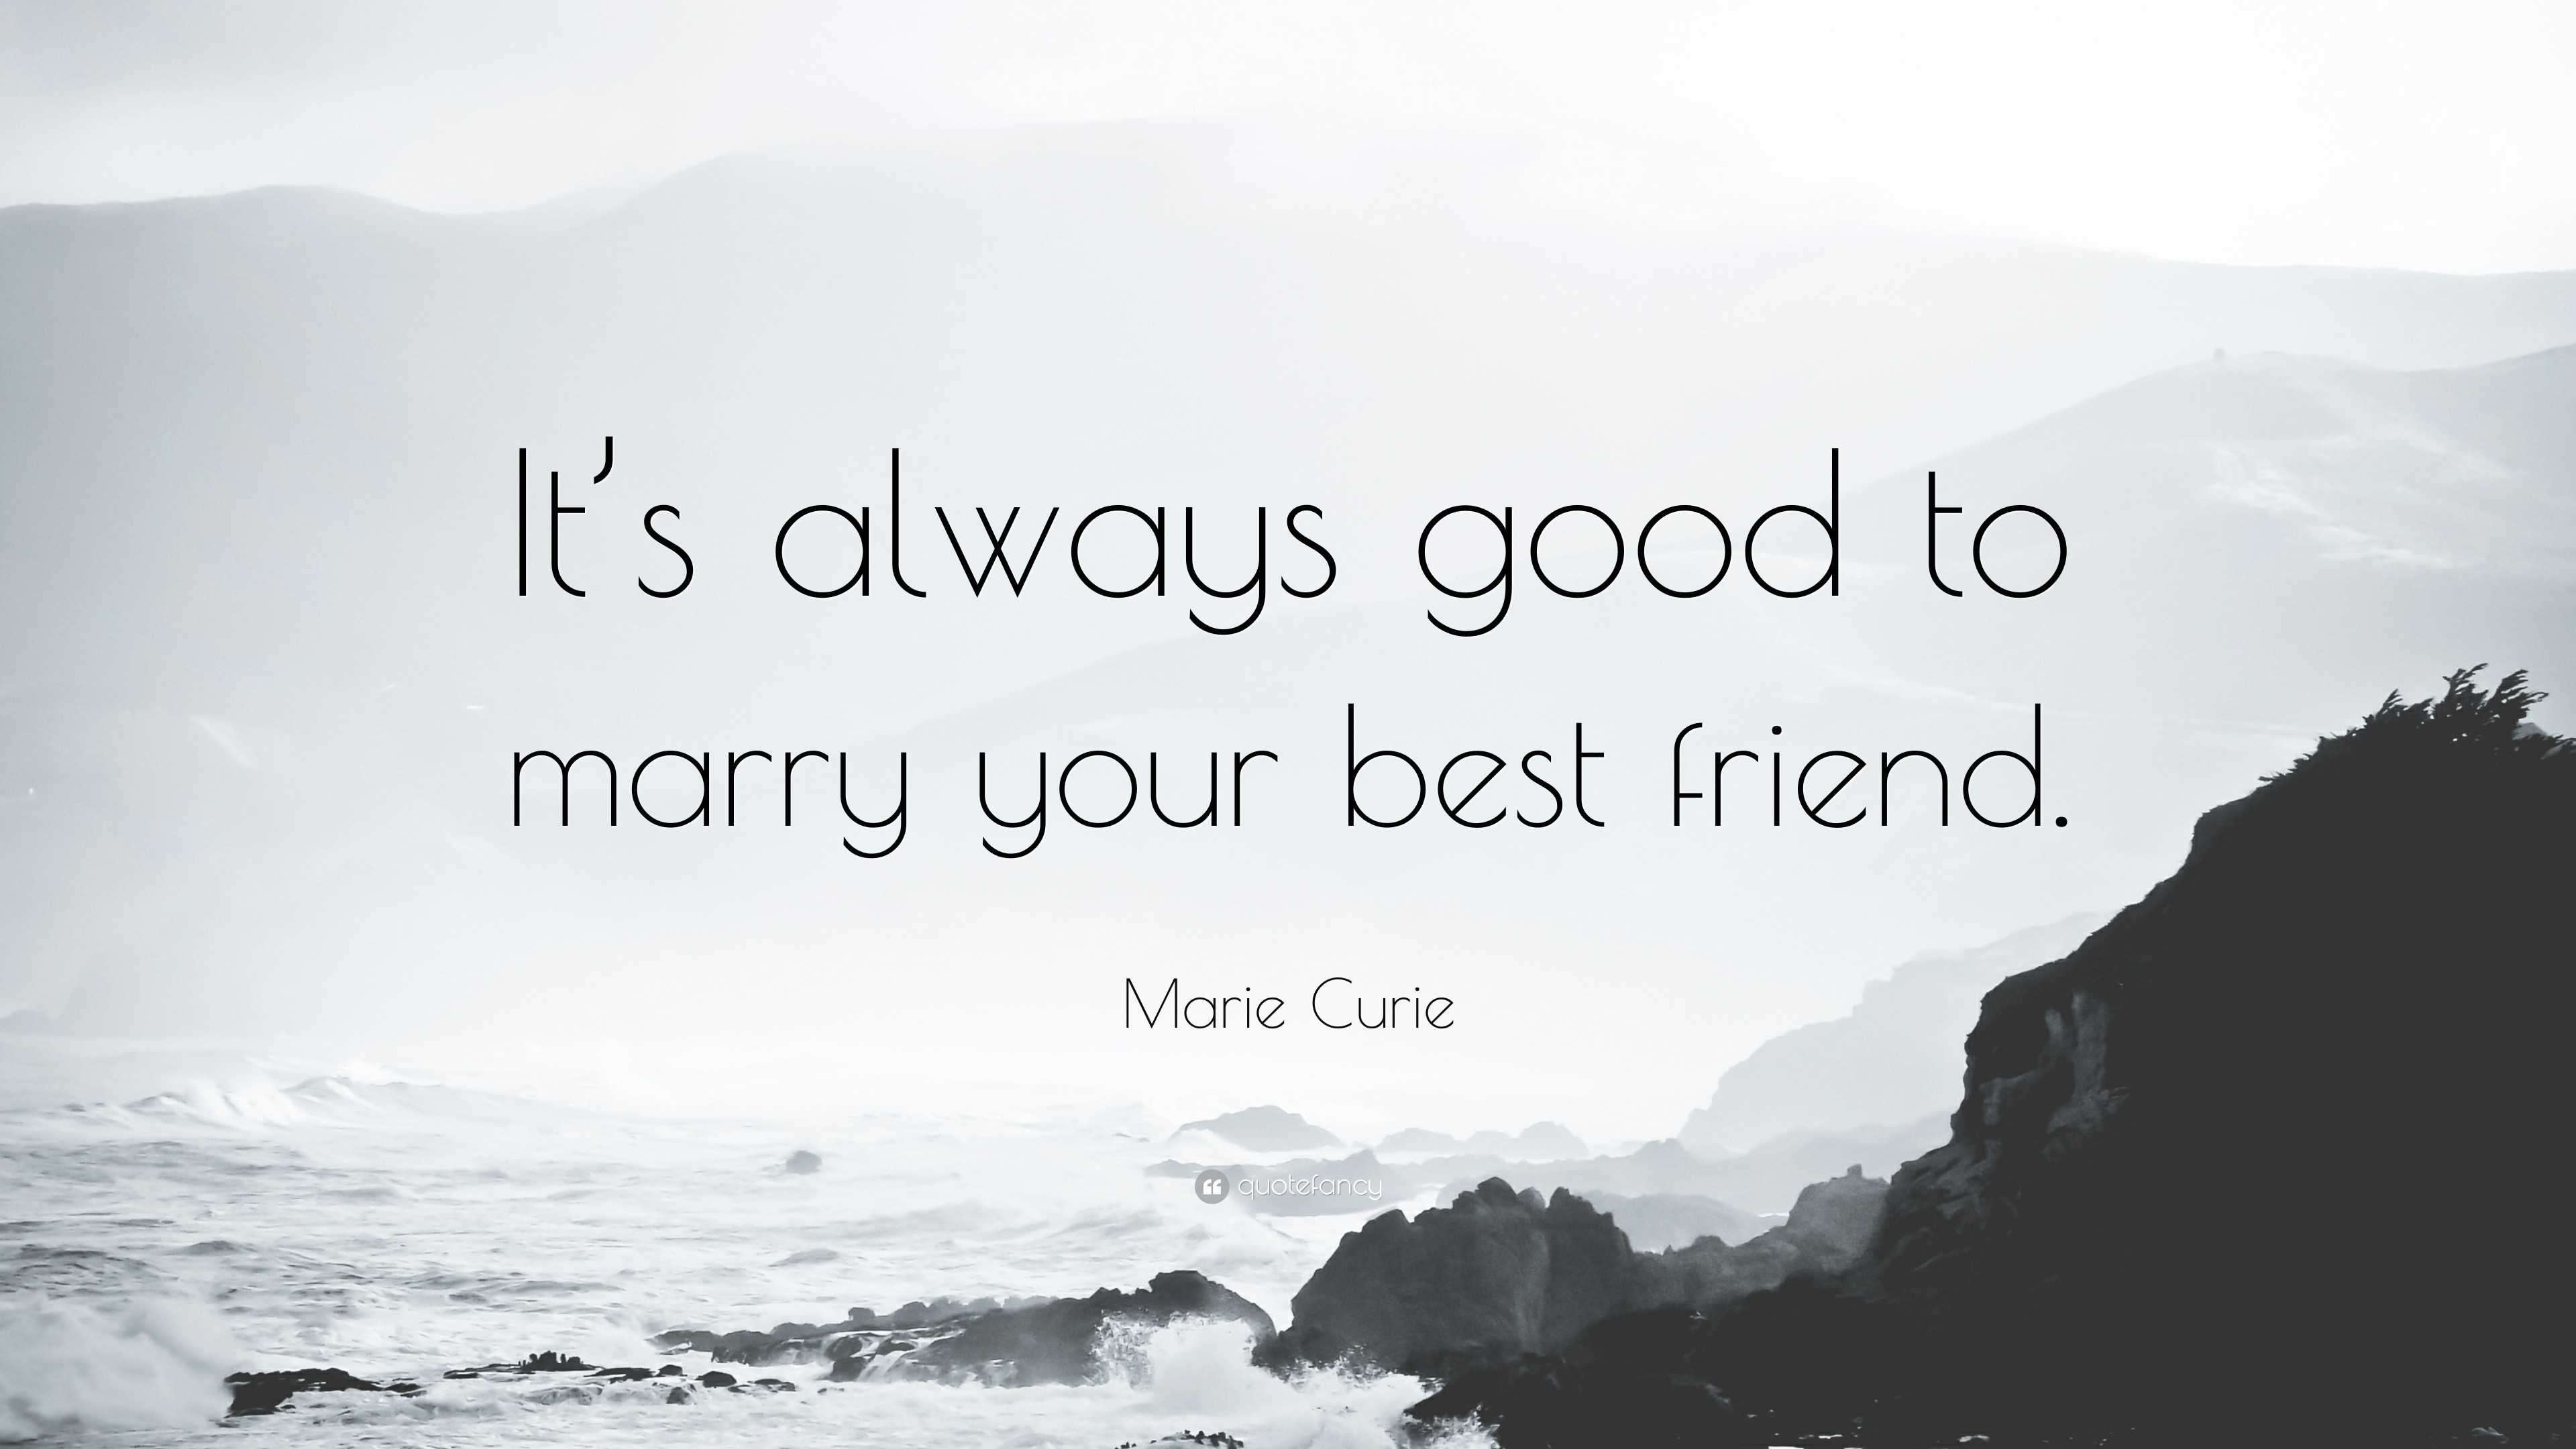 Marie Curie Quote: “It's Always Good To Marry Your Best Friend.”